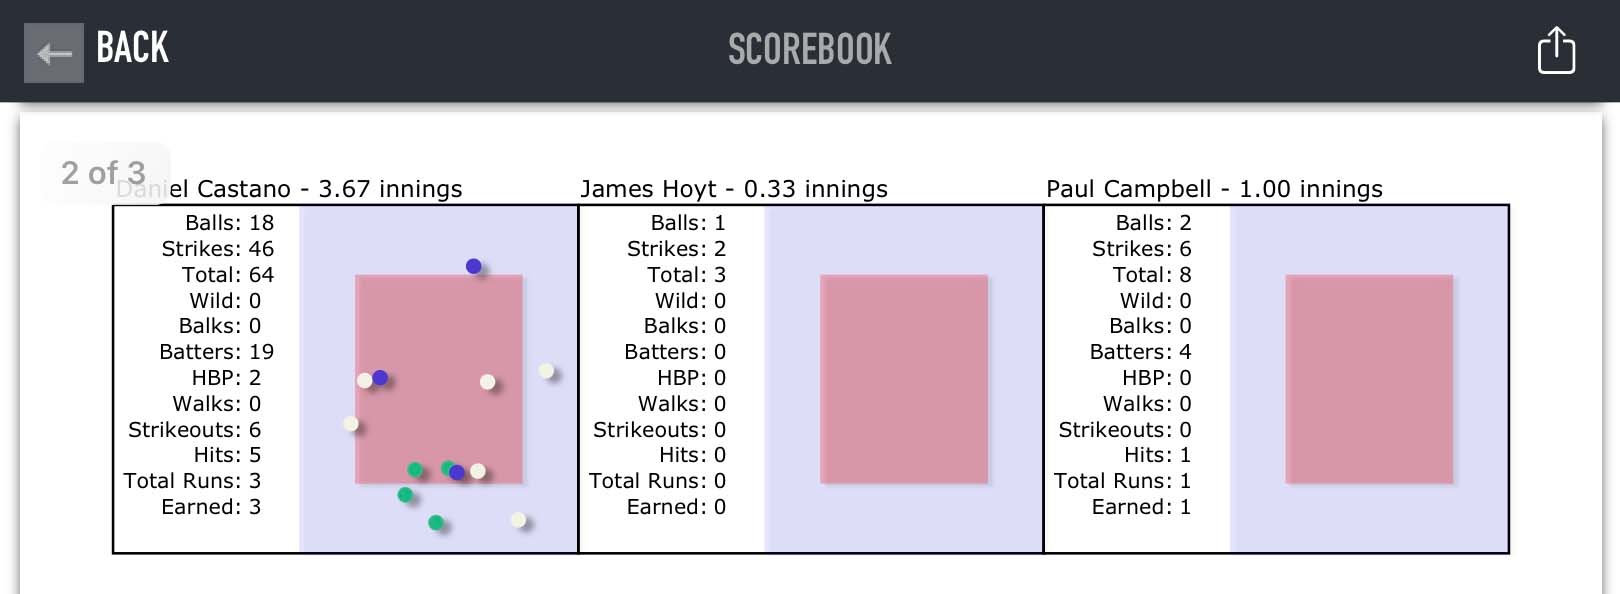 The end-of-game pitcher summary. Location wasn't tracked for two of the pitchers, so that data isn't plotted.